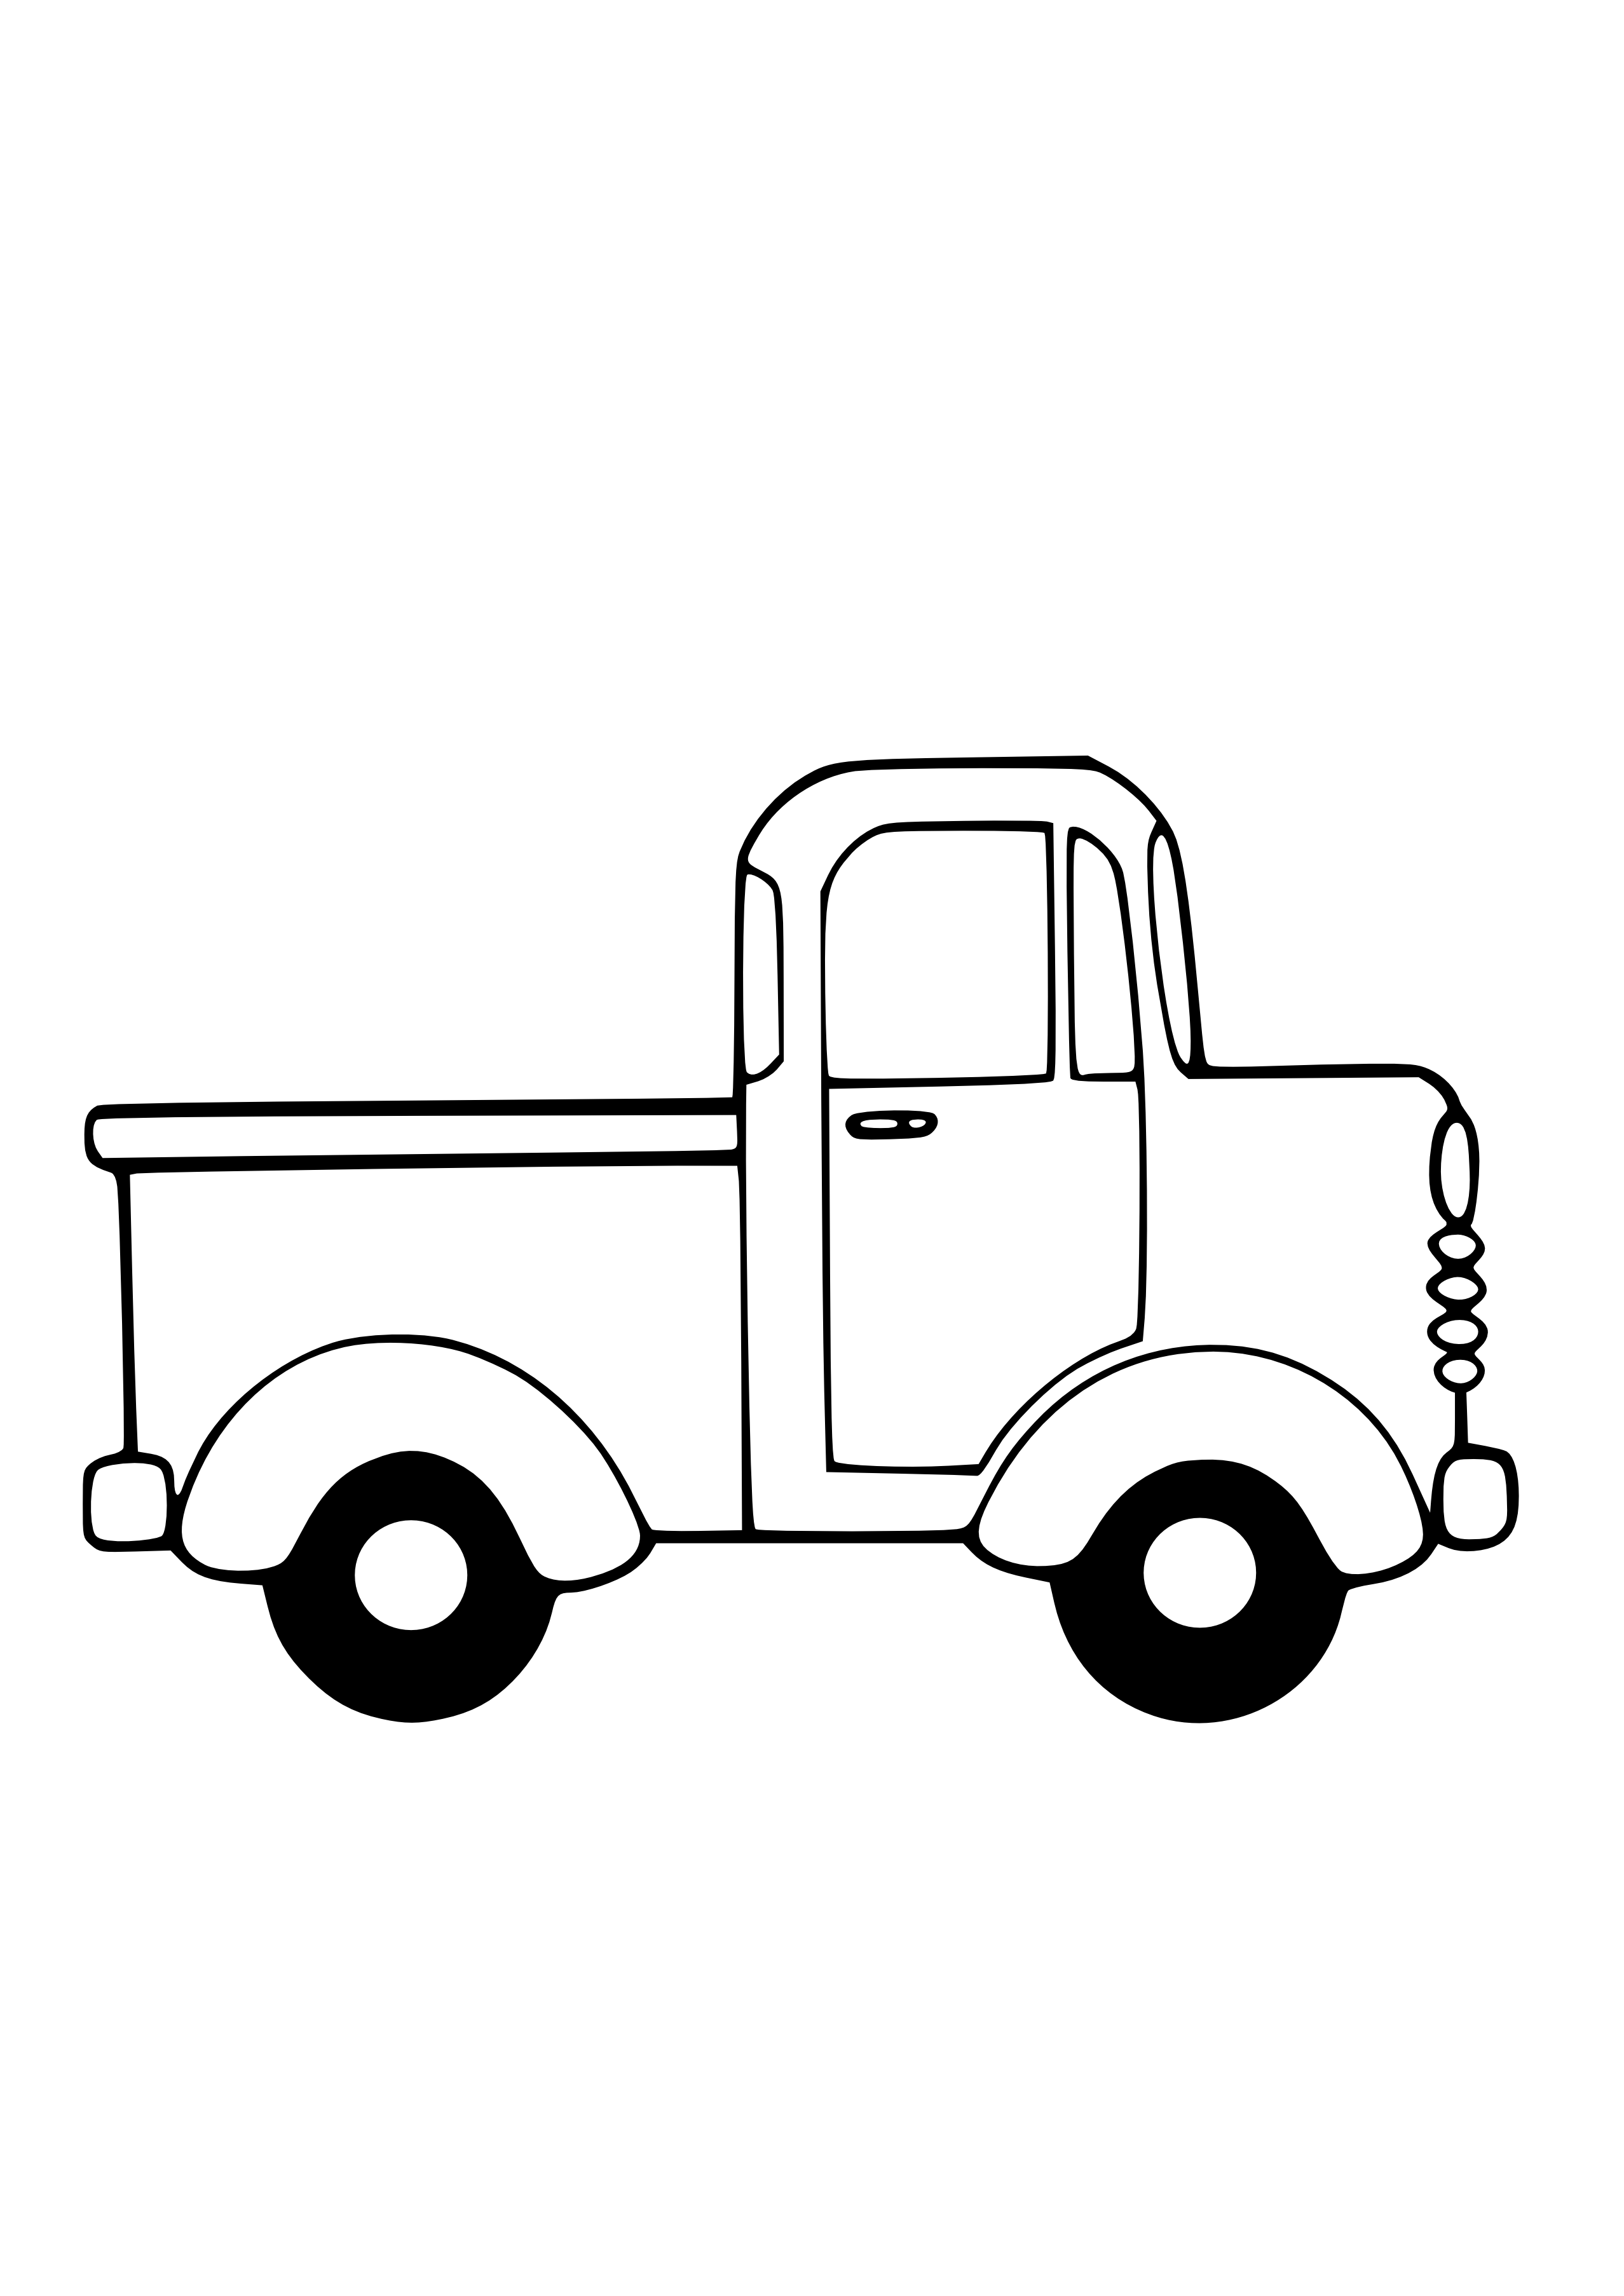 Monster Truck Clipart Black And White | Clipart Panda - Free ...